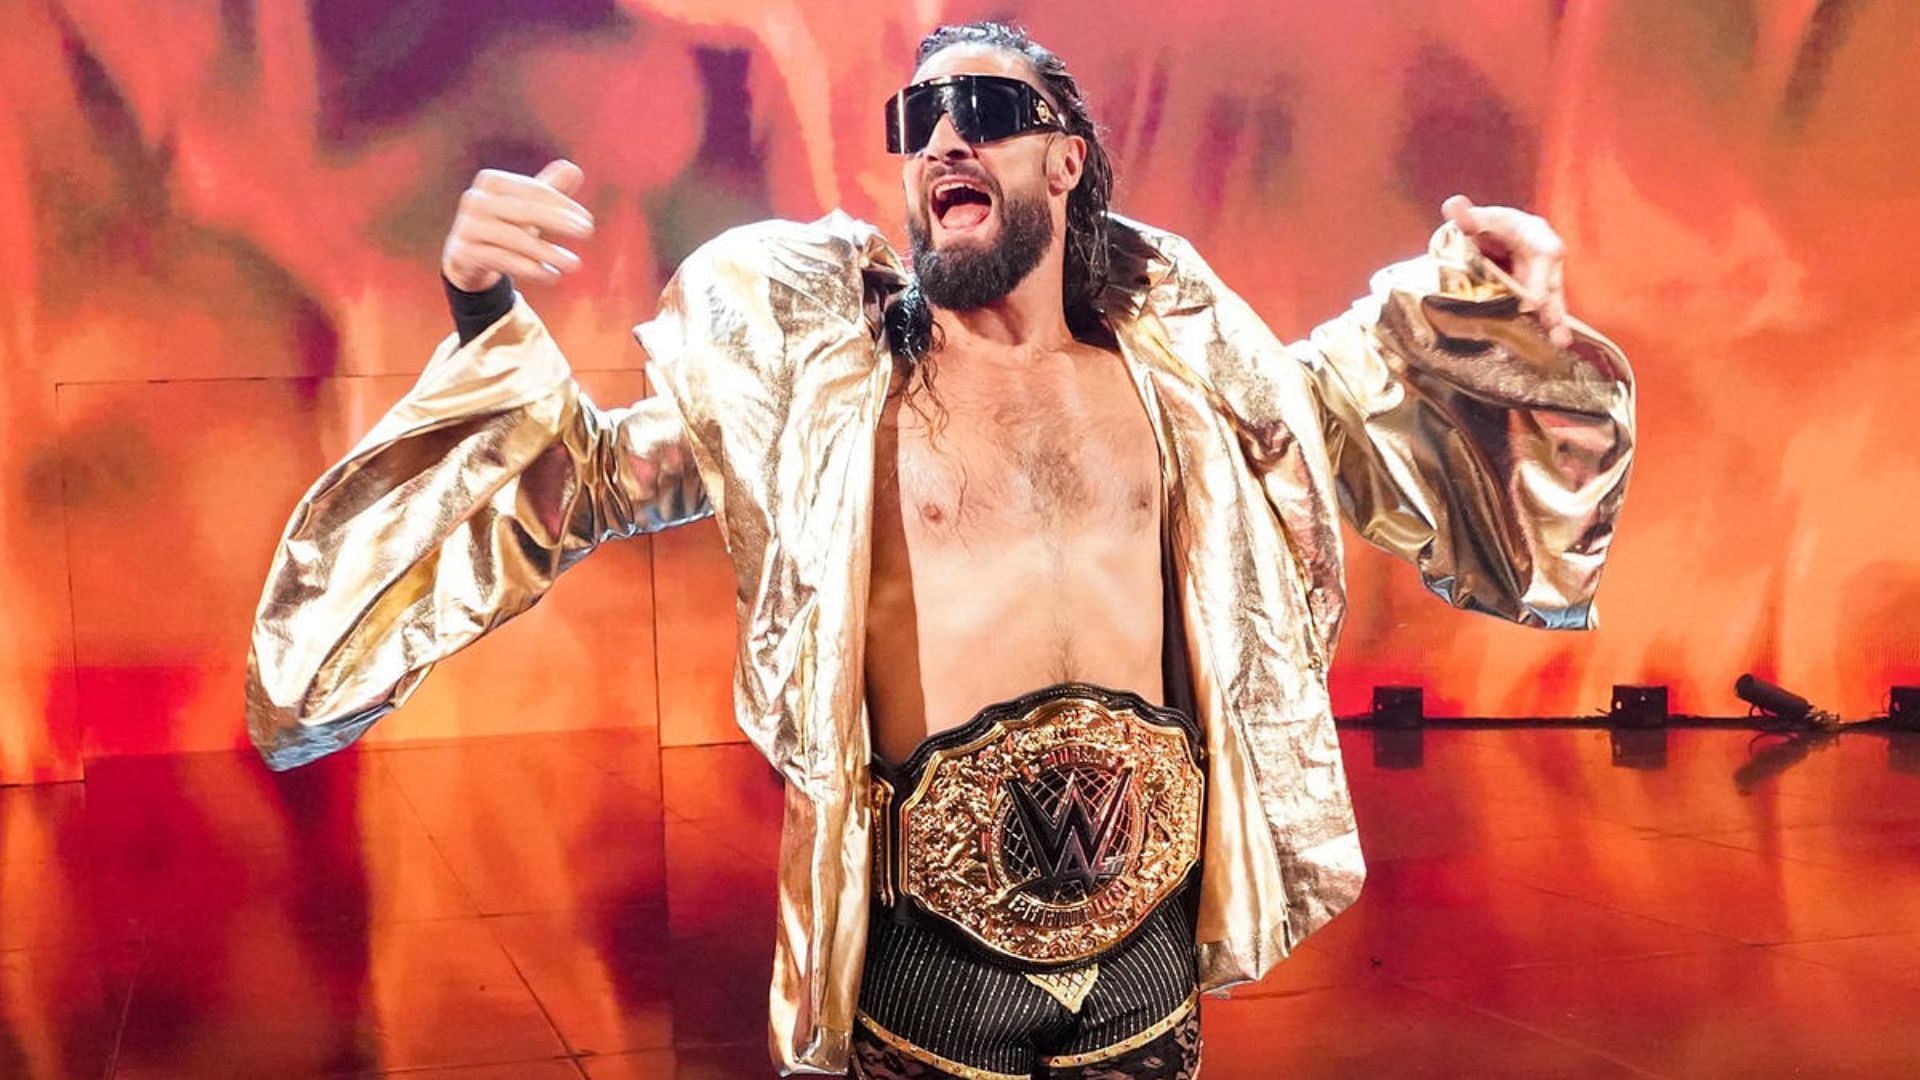 Seth Rollins is the reigning and defending World Heavyweight Champion